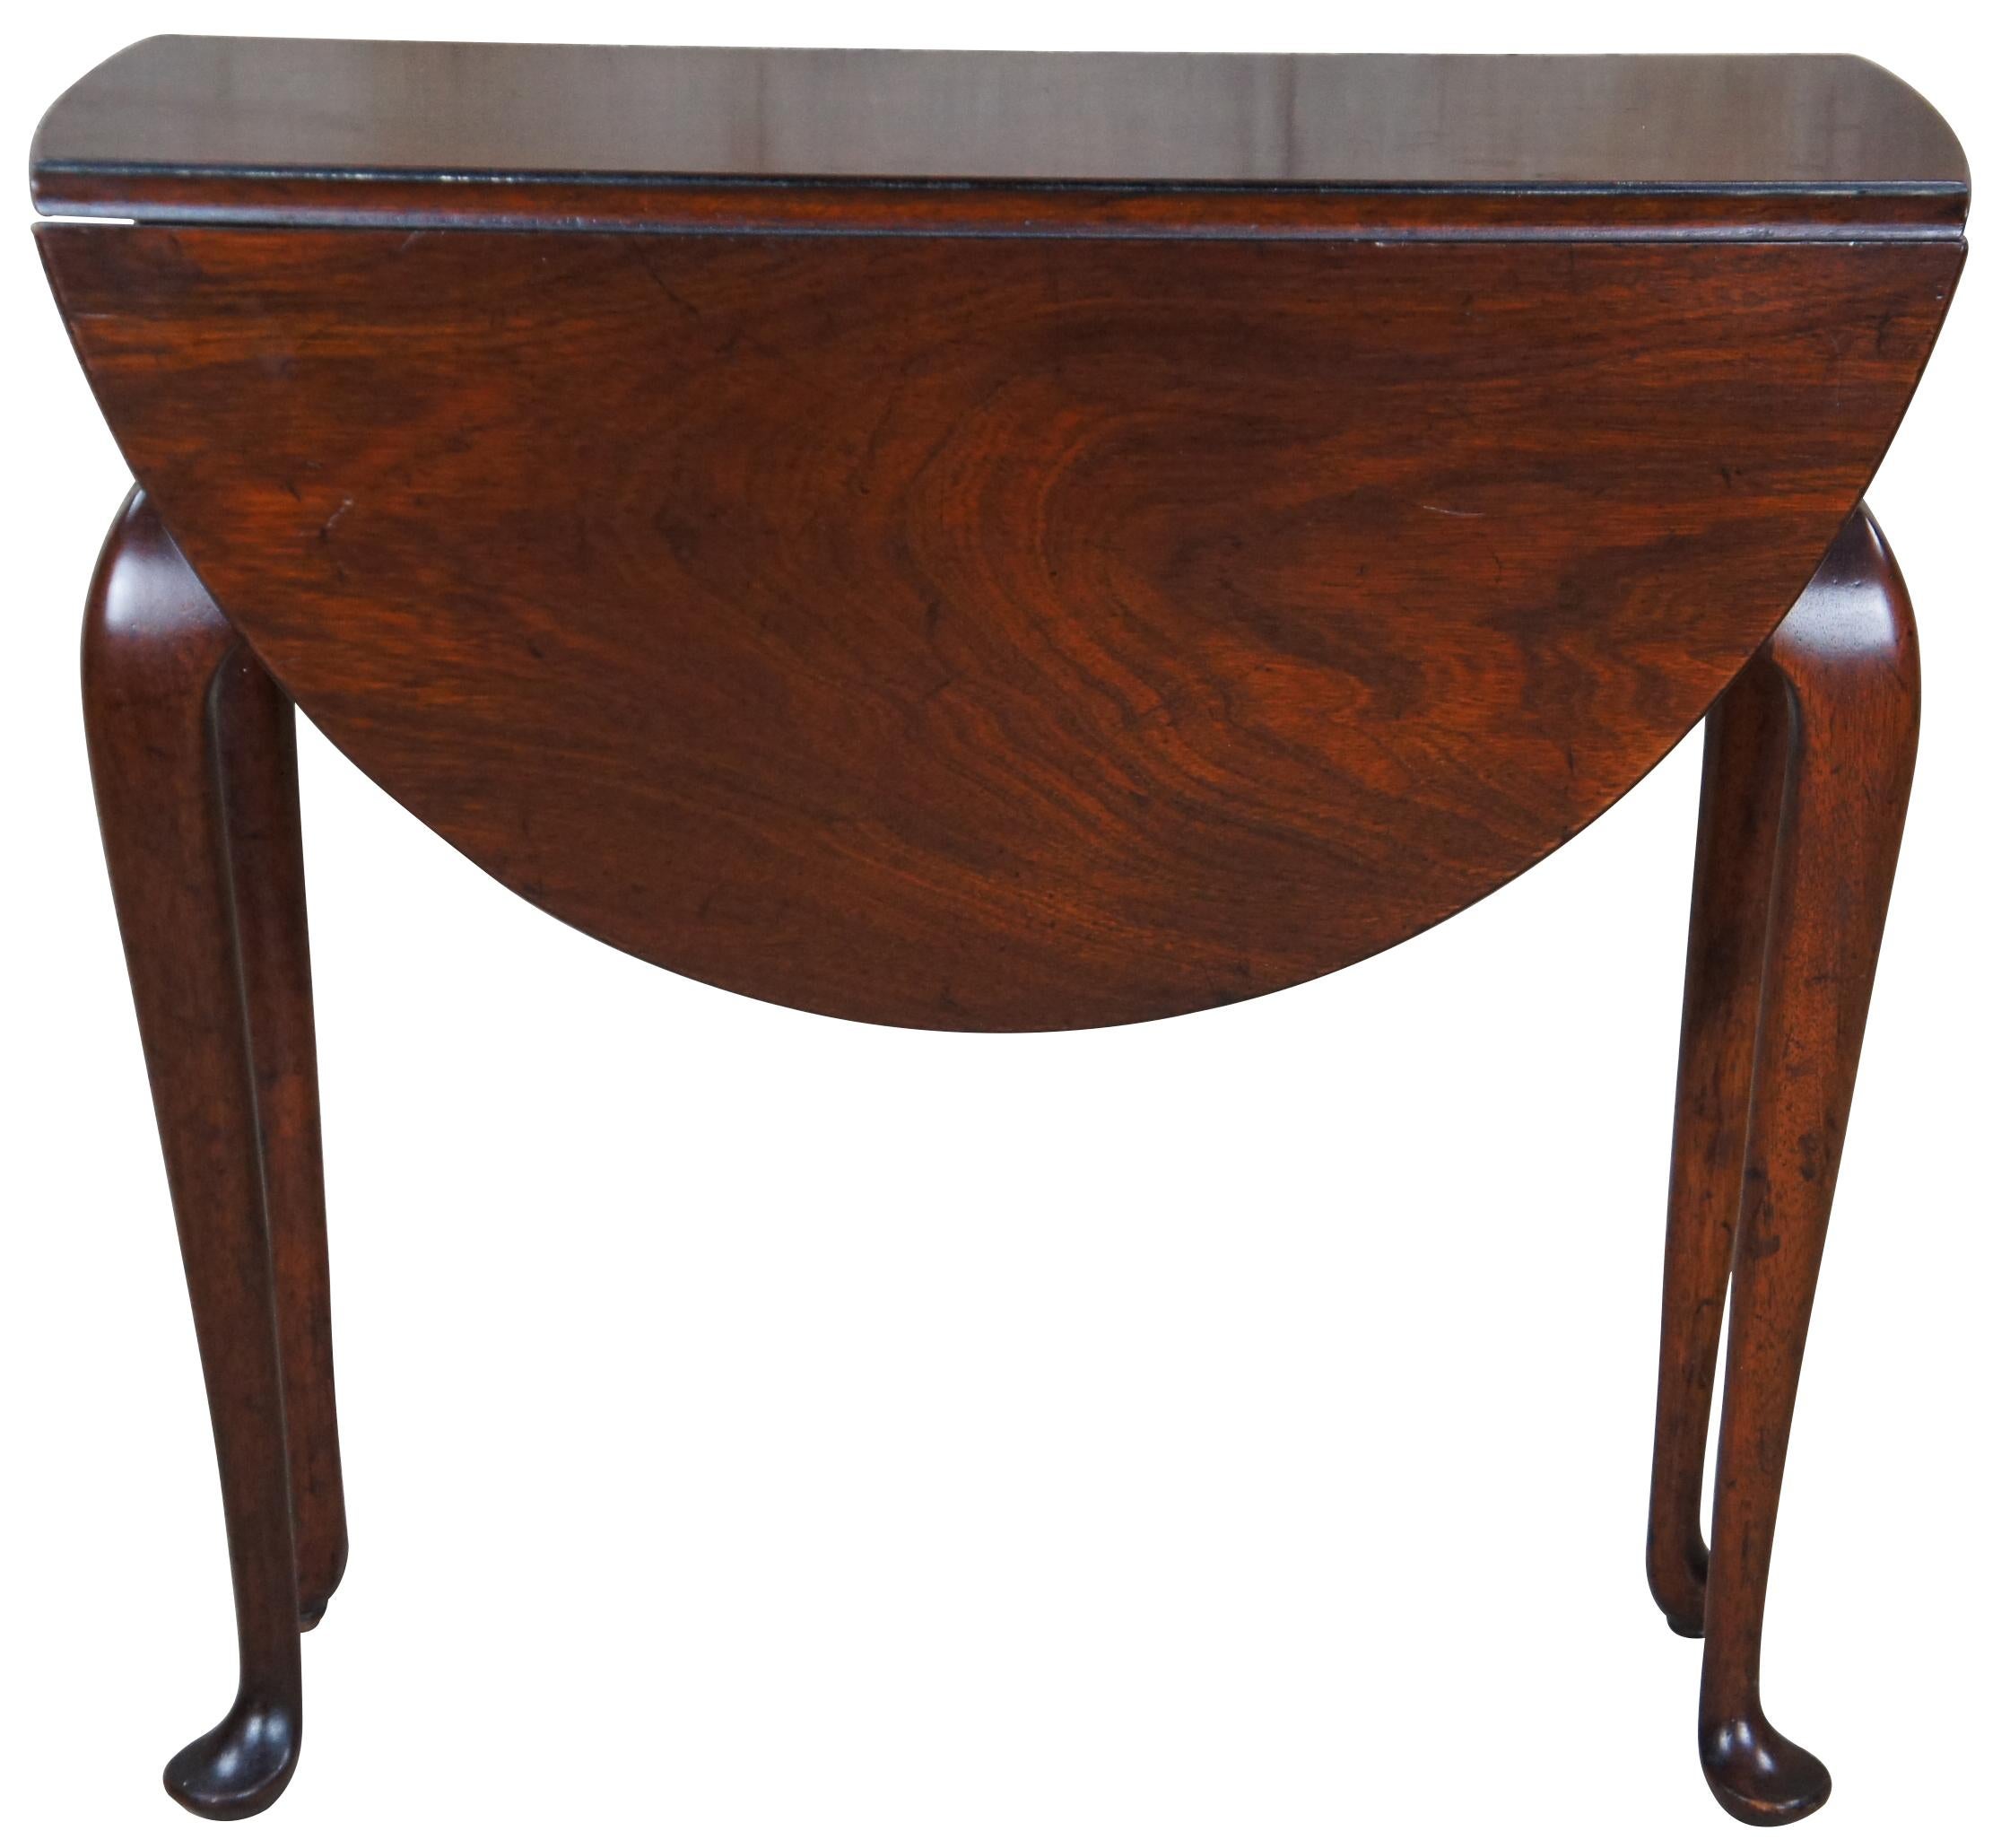 Vintage Queen Anne drop leaf gate leg side table. Made of mahogany featuring rectangular or oval form with two leaves and long cabriole legs with pad feet.

Measures: 24